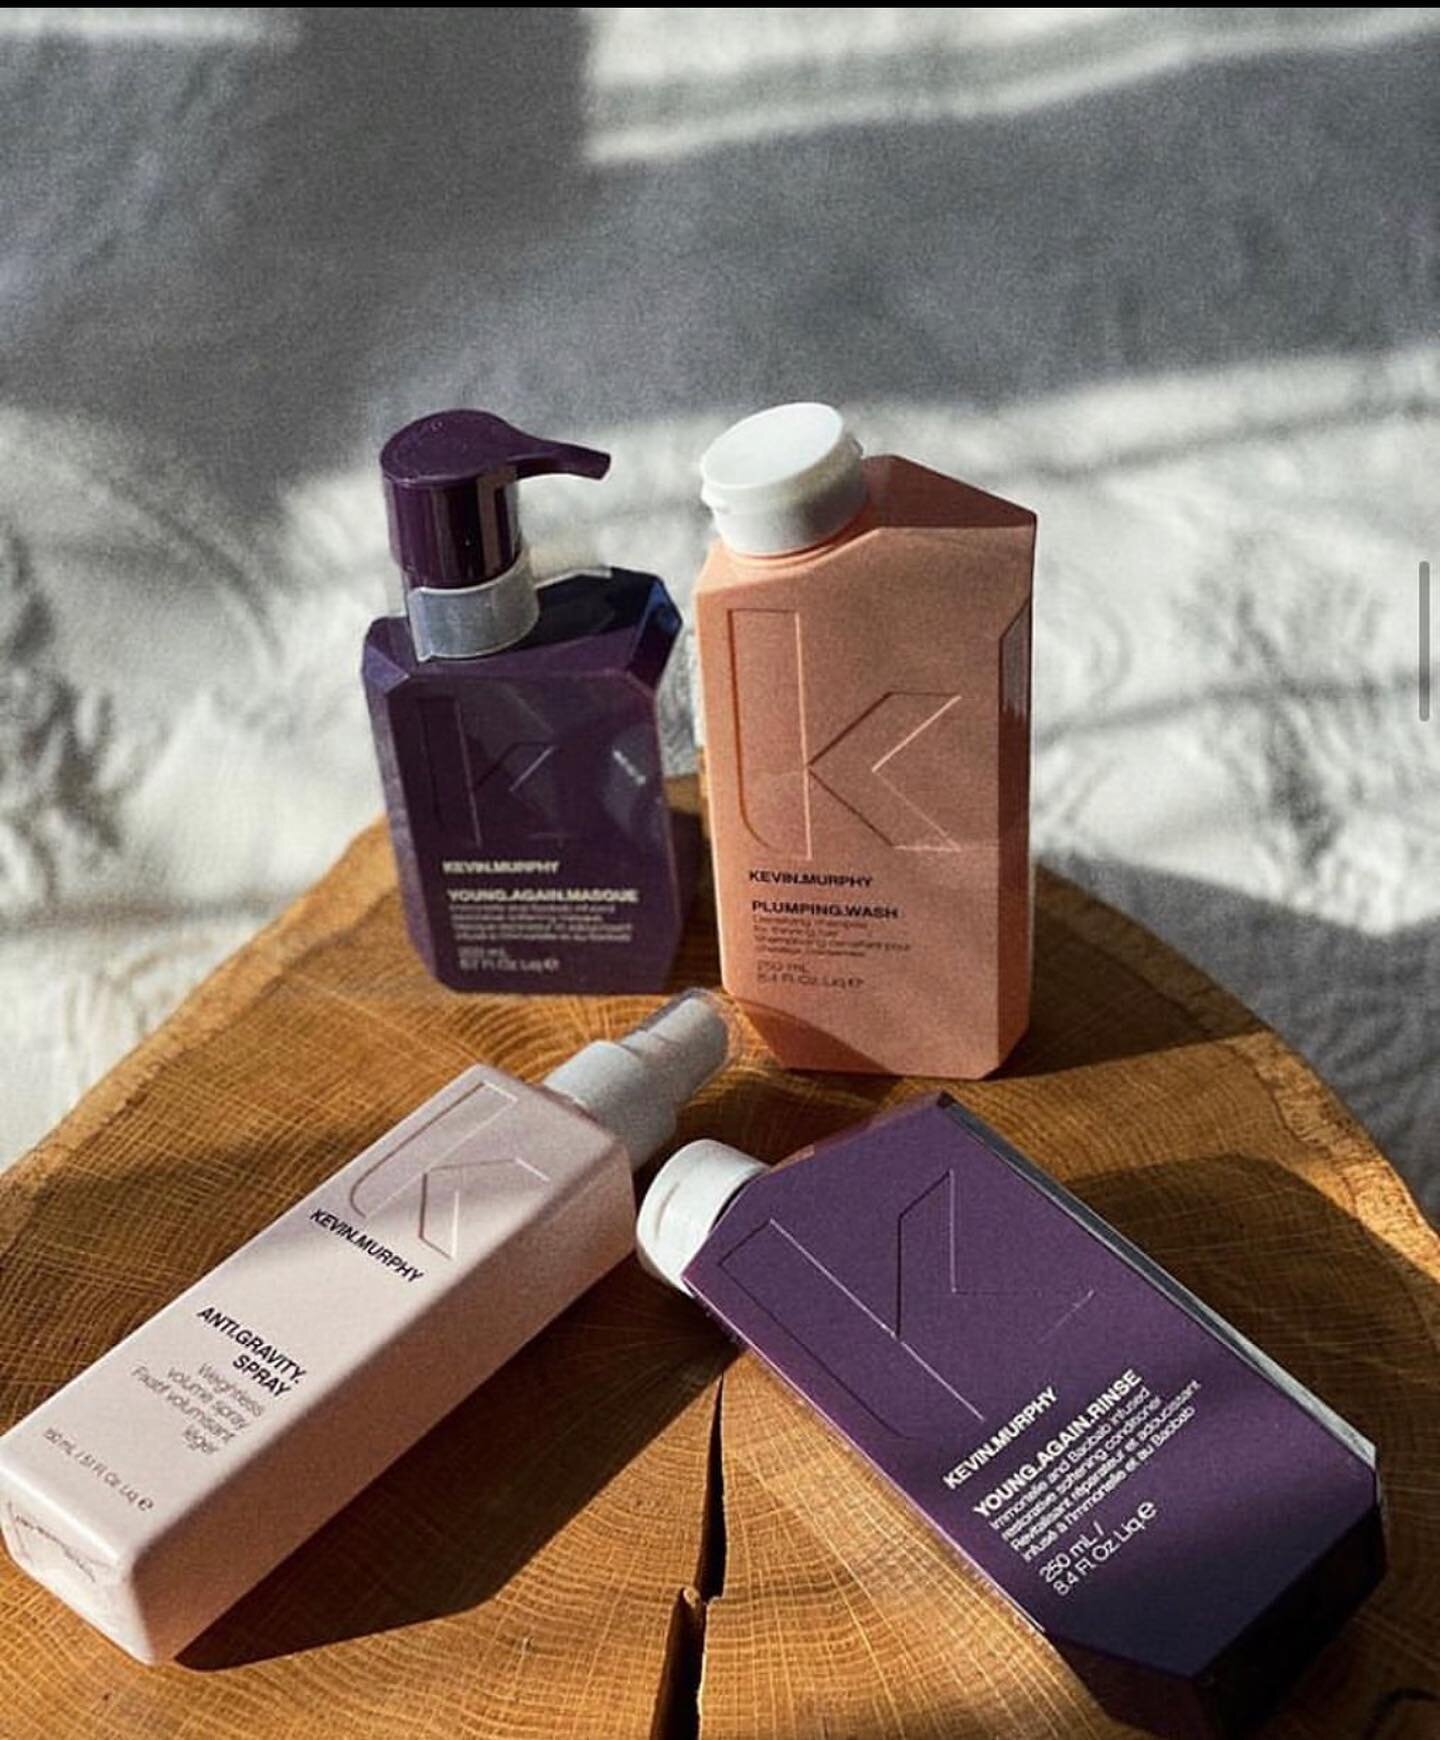 @kevin.murphy Obsessed 🤩🫶🏼